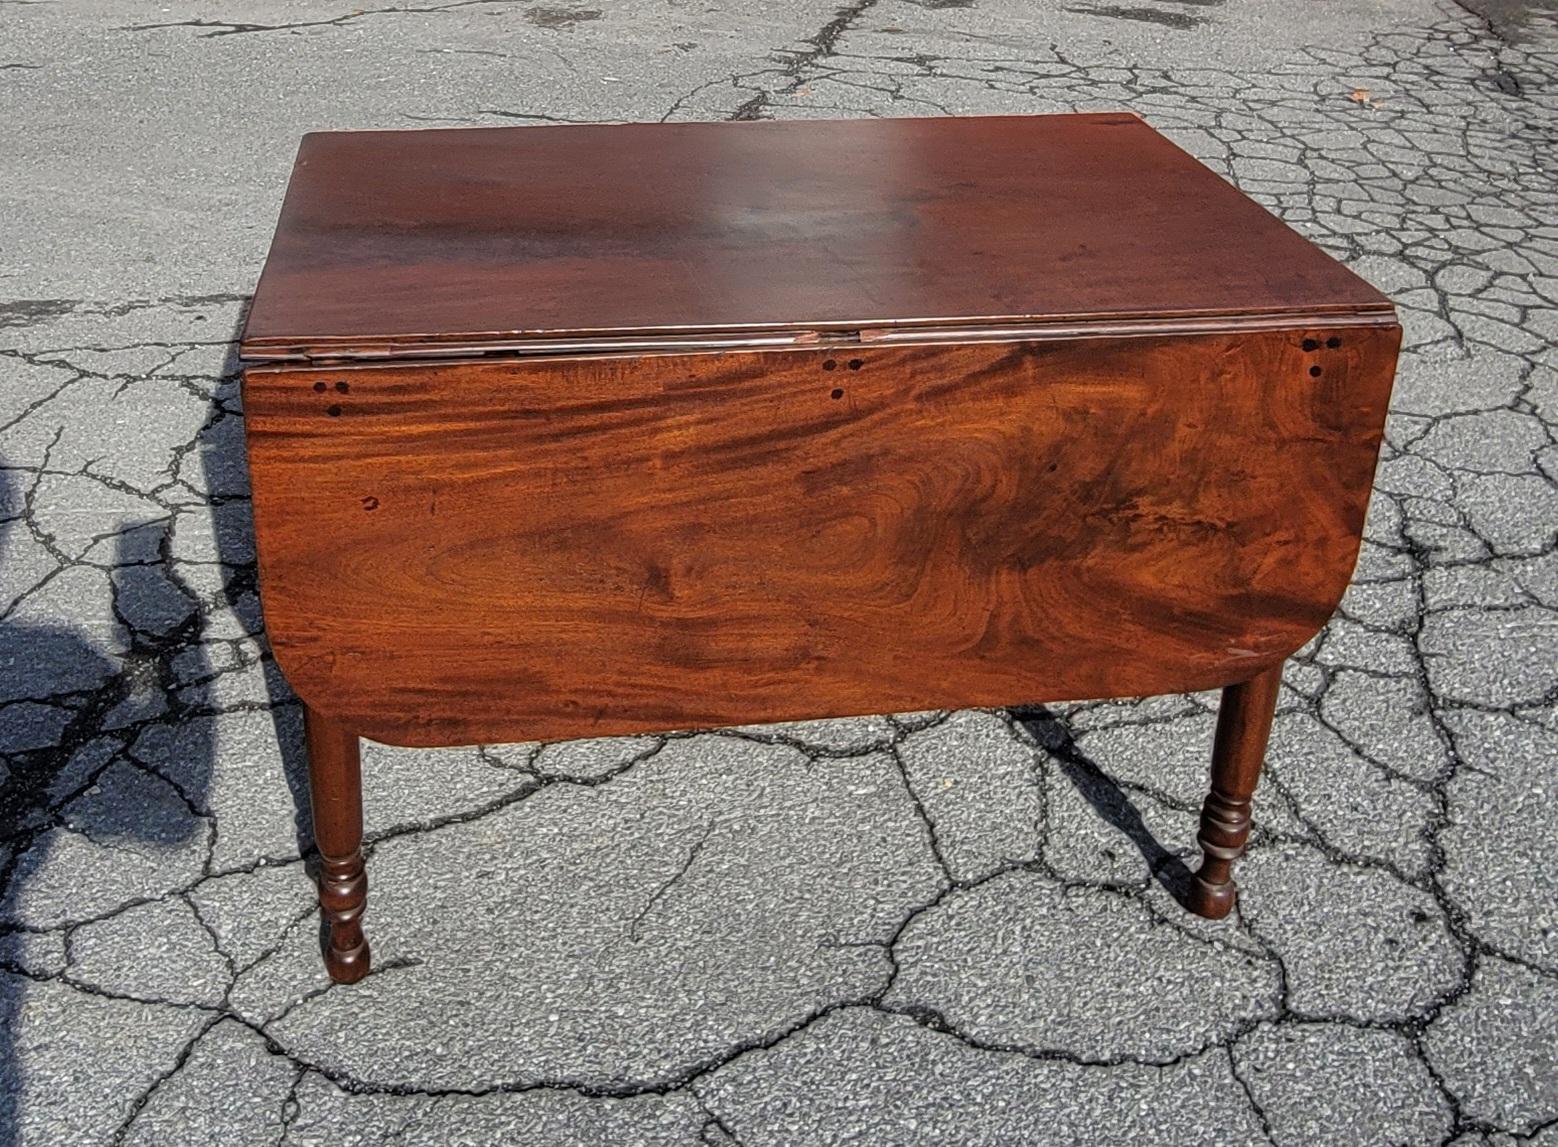 19th Century American Empire Federal Flame Mahogany Drop-Leaf Dining Table For Sale 11